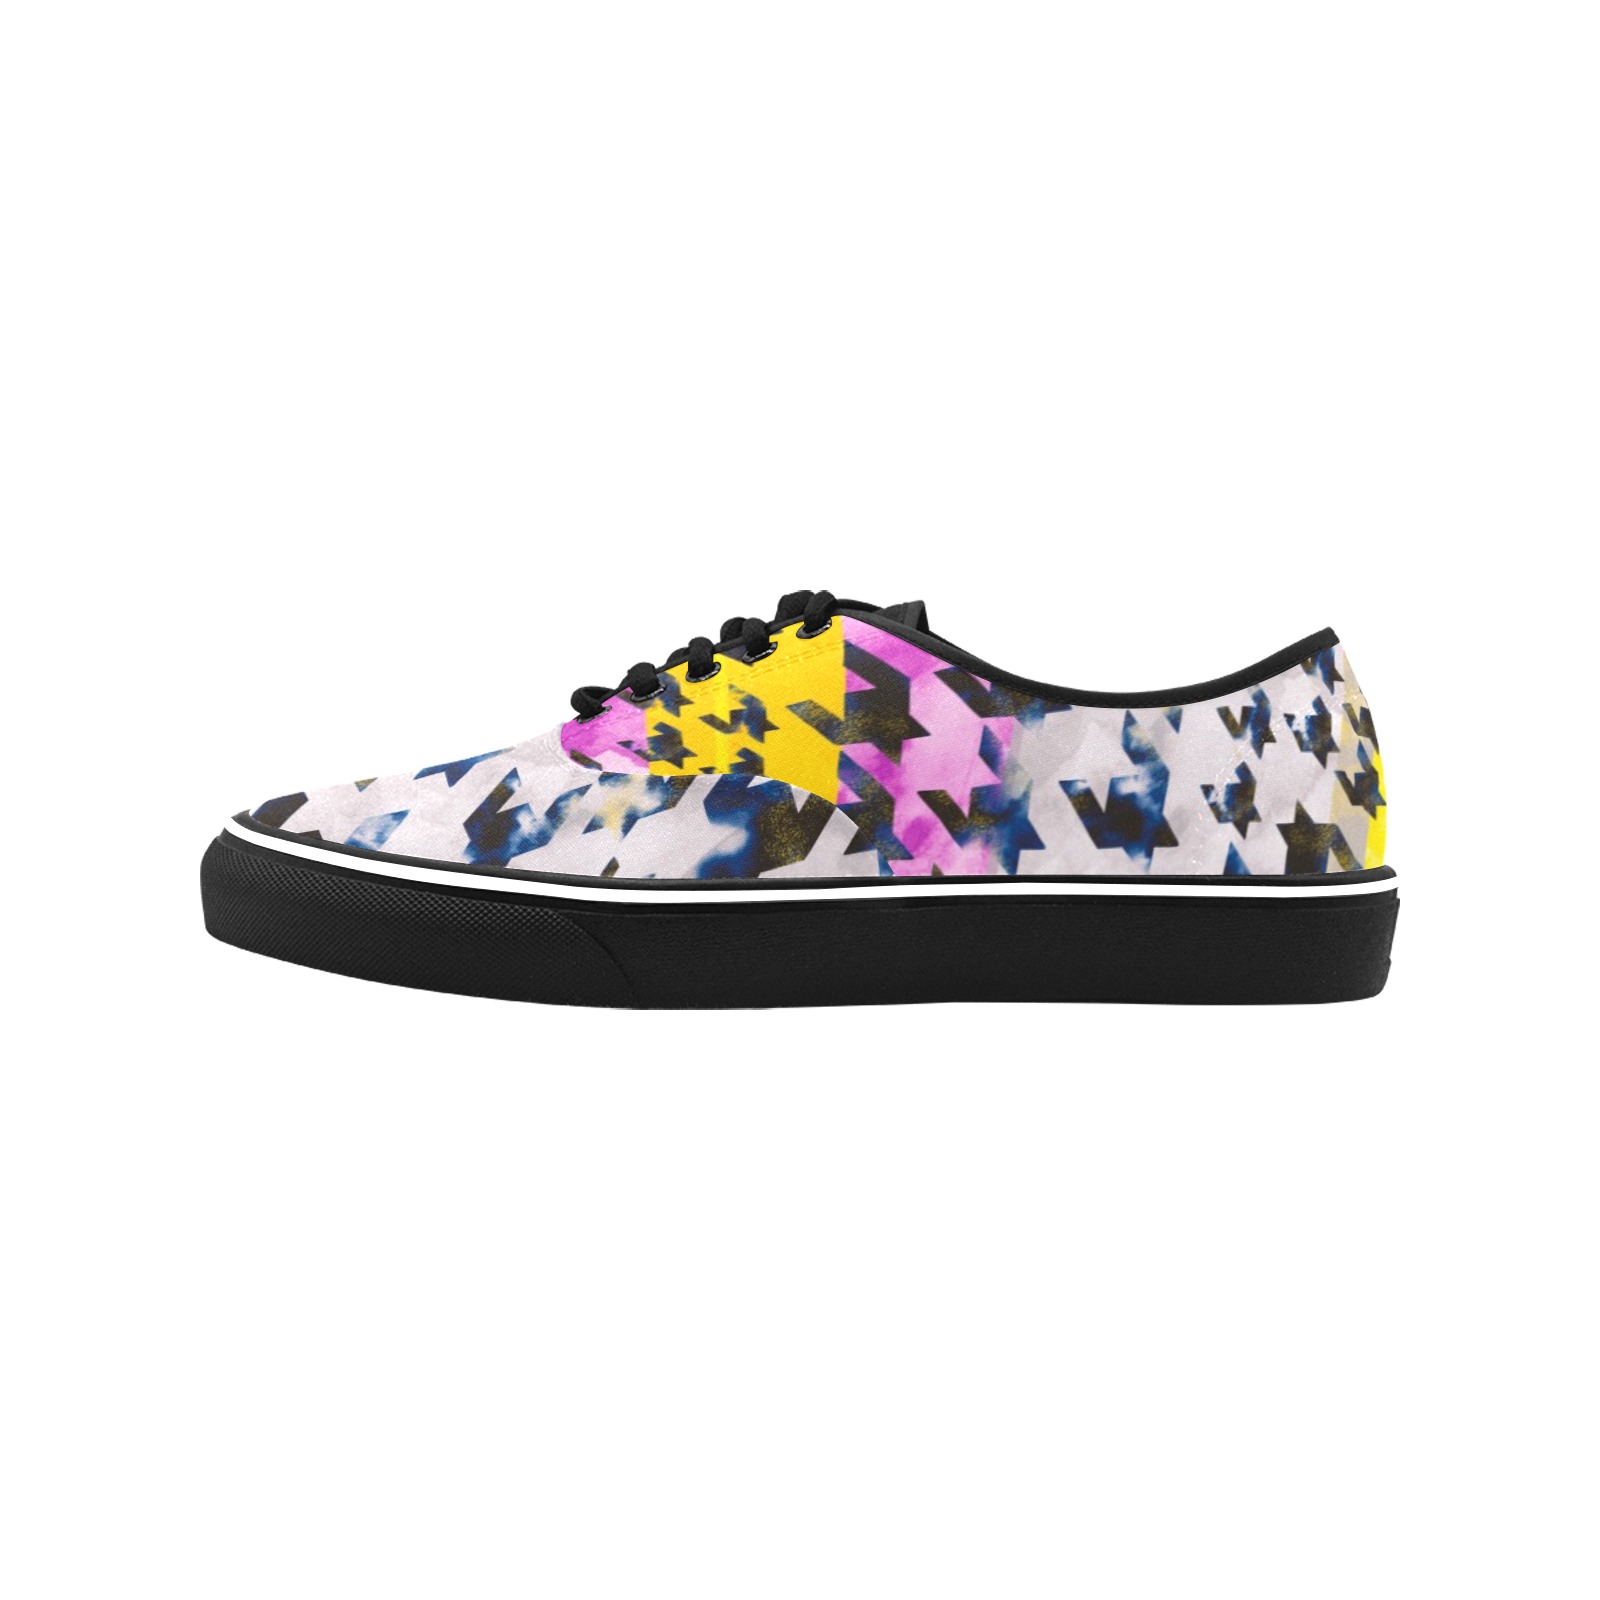 Houndstooth pattern 49HG Classic Women's Canvas Low Top Shoes (Model E001-4)